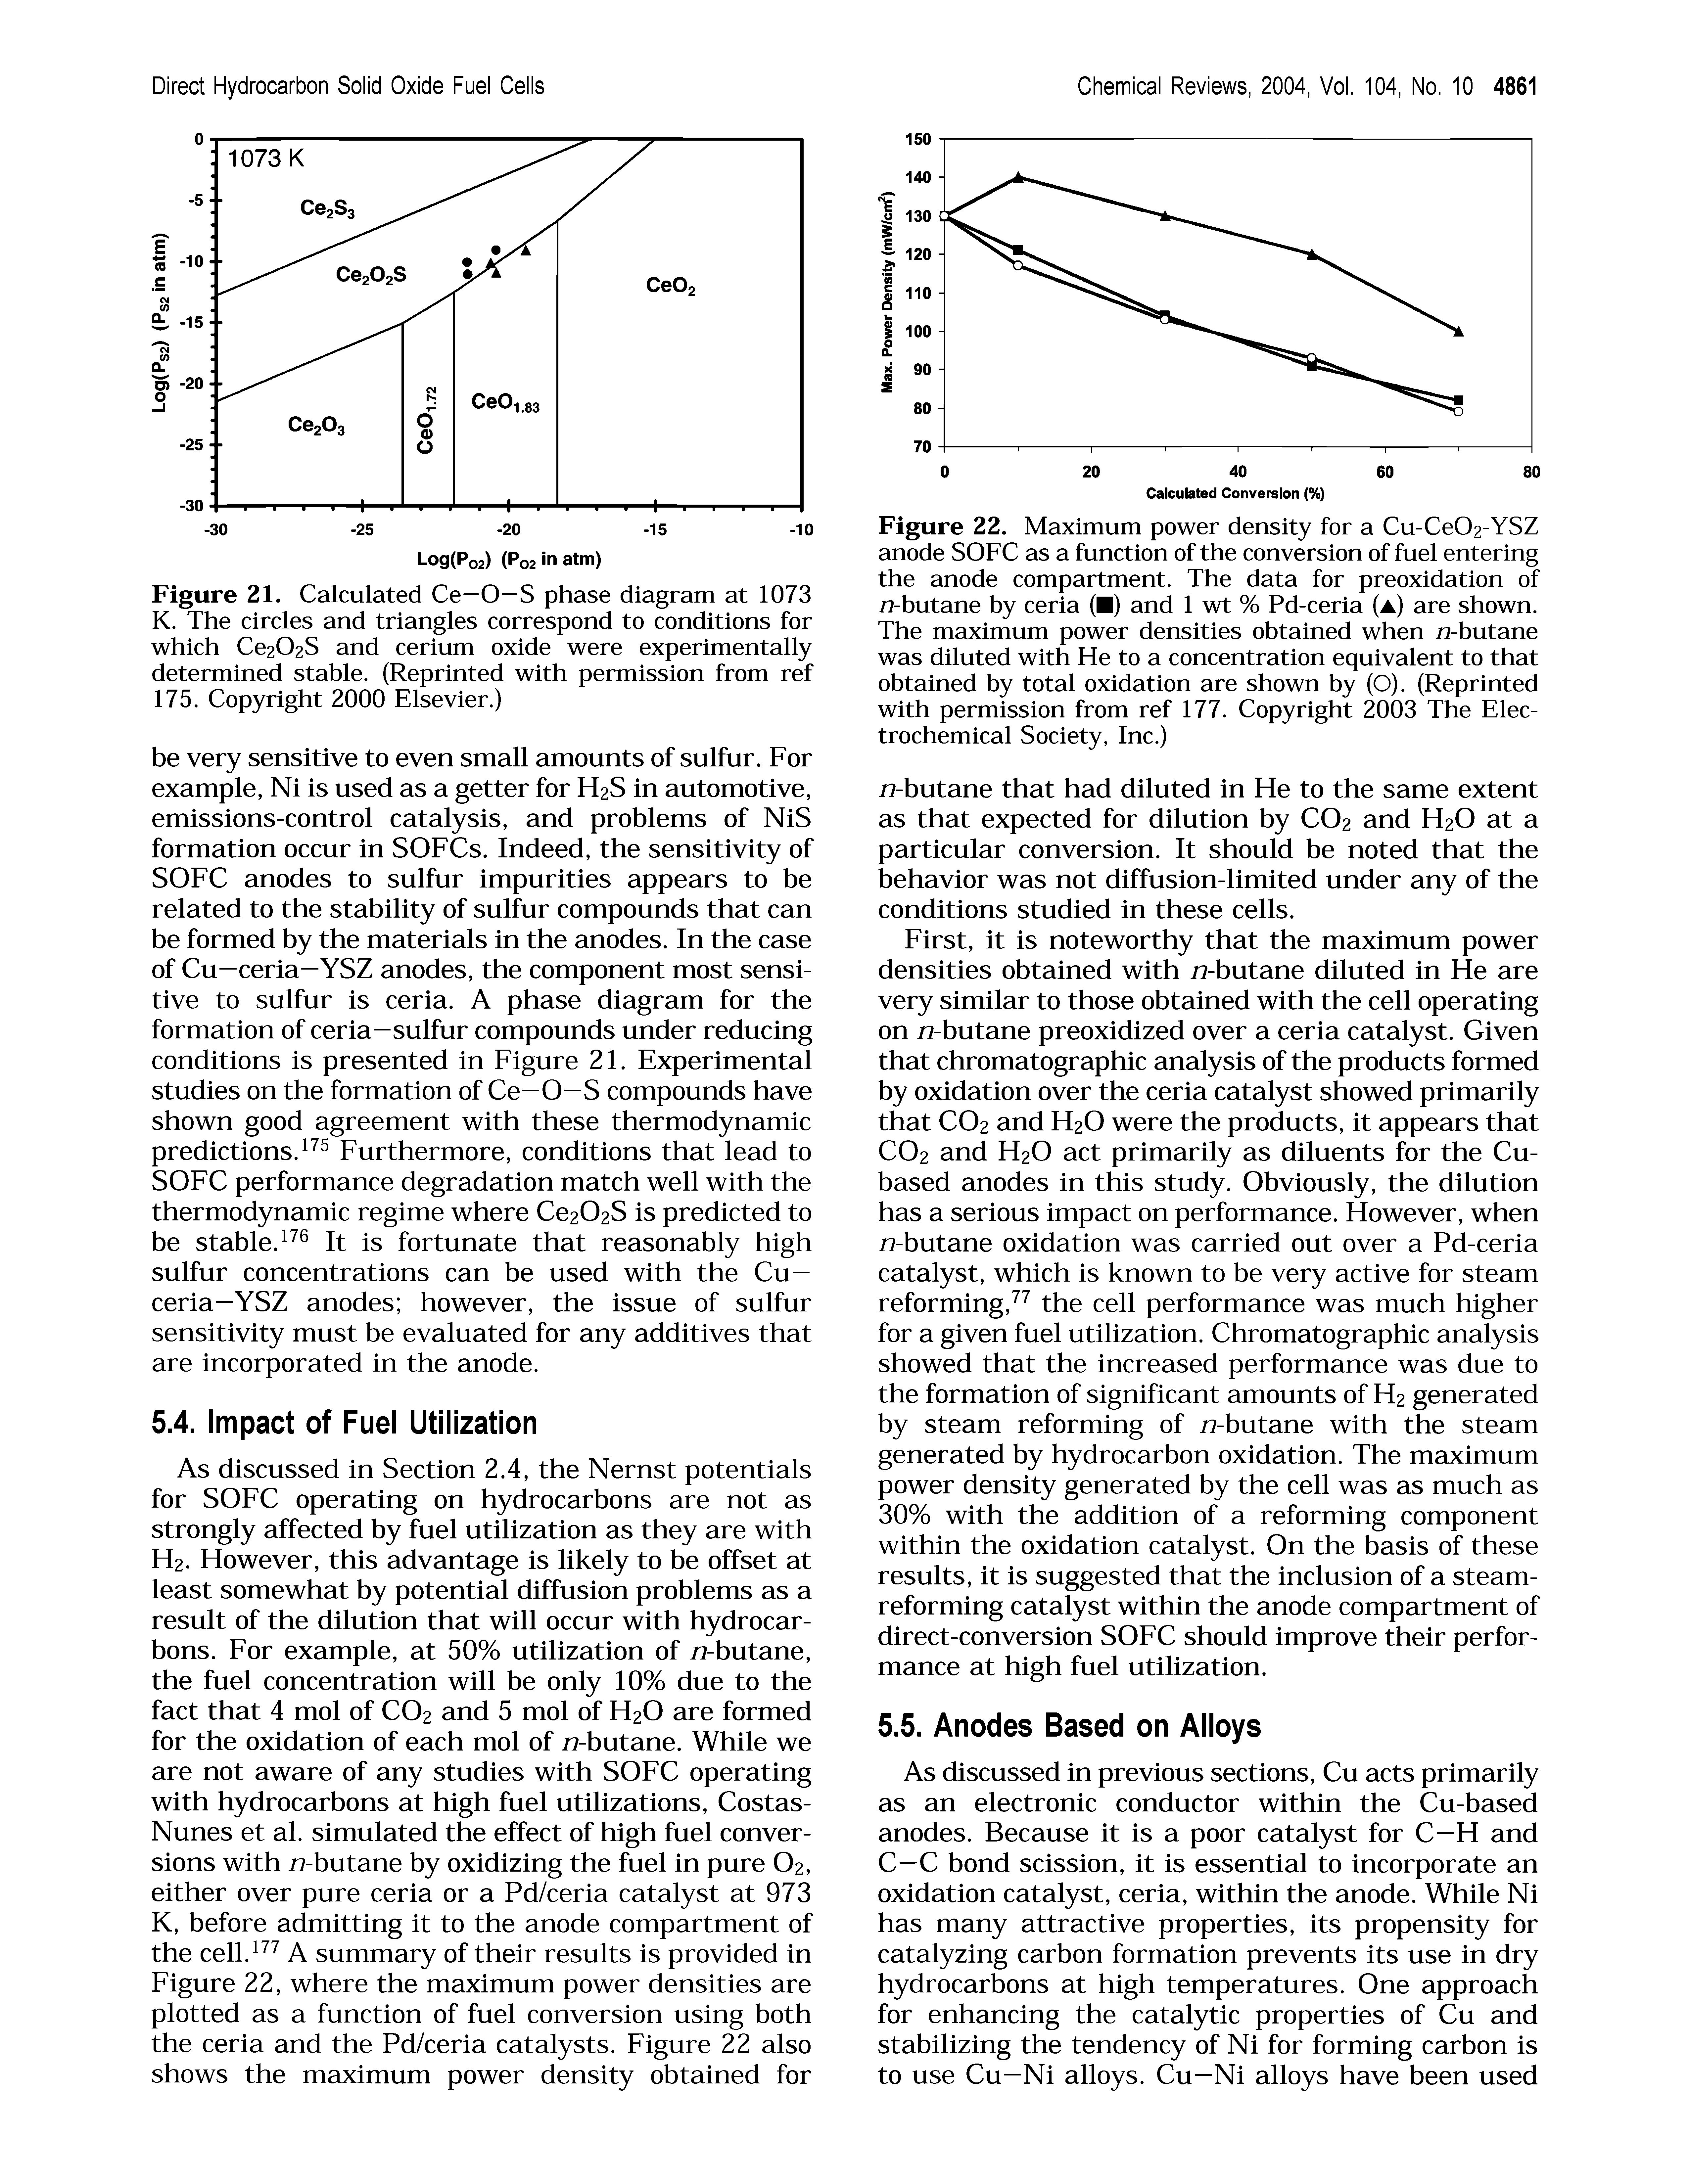 Figure 22. Maximum power density for a Cu-Ce02-YSZ anode SOFC as a function of the conversion of fuel entering the anode compartment. The data for preoxidation of 77-butane by ceria ( ) and 1 wt % Pd-ceria (a) are shown. The maximum power densities obtained when /7-butane was diluted with He to a concentration equivalent to that obtained by total oxidation are shown by (O). (Reprinted with permission from ref 177. Copyright 2003 The Electrochemical Society, Inc.)...